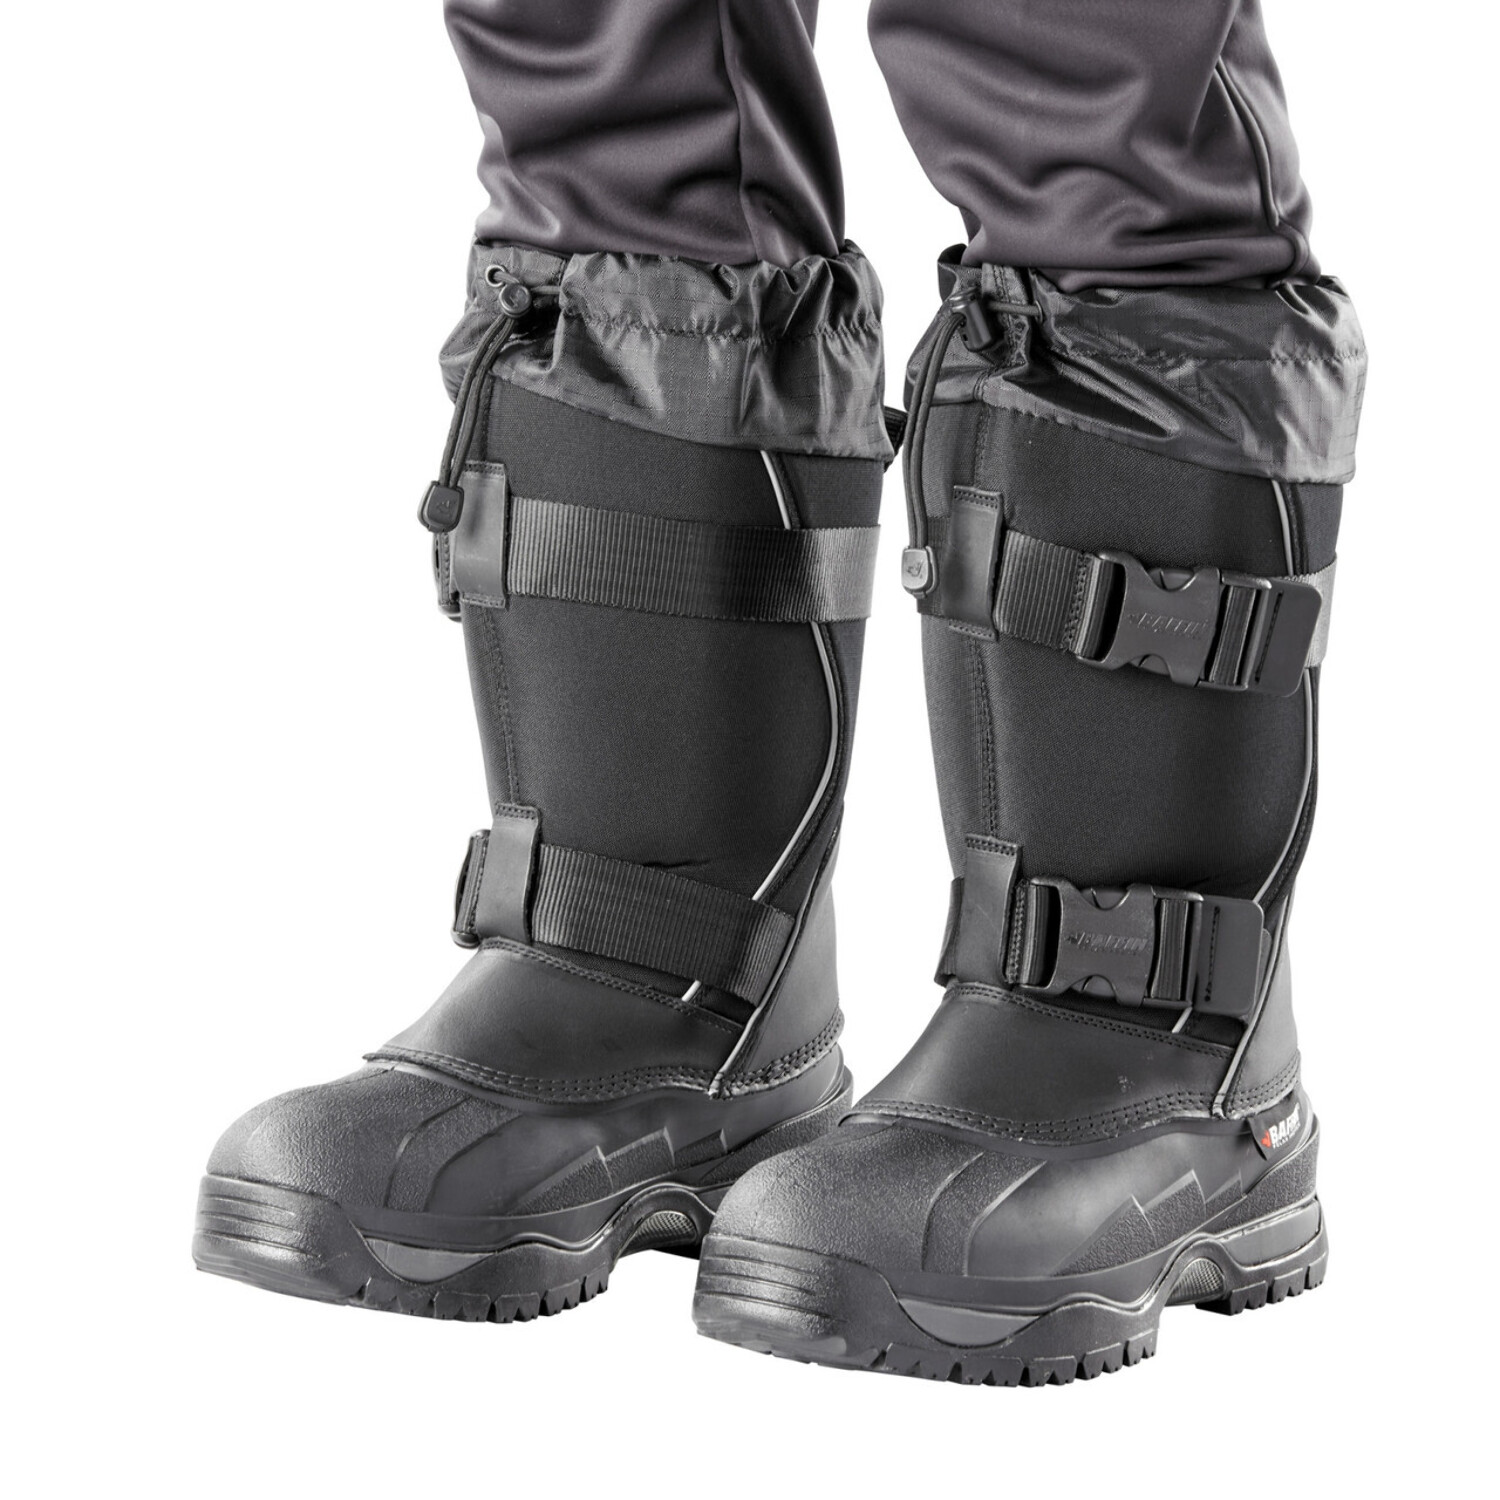 Baffin Impact Insulated Snow Boot - Men's - image 5 of 5